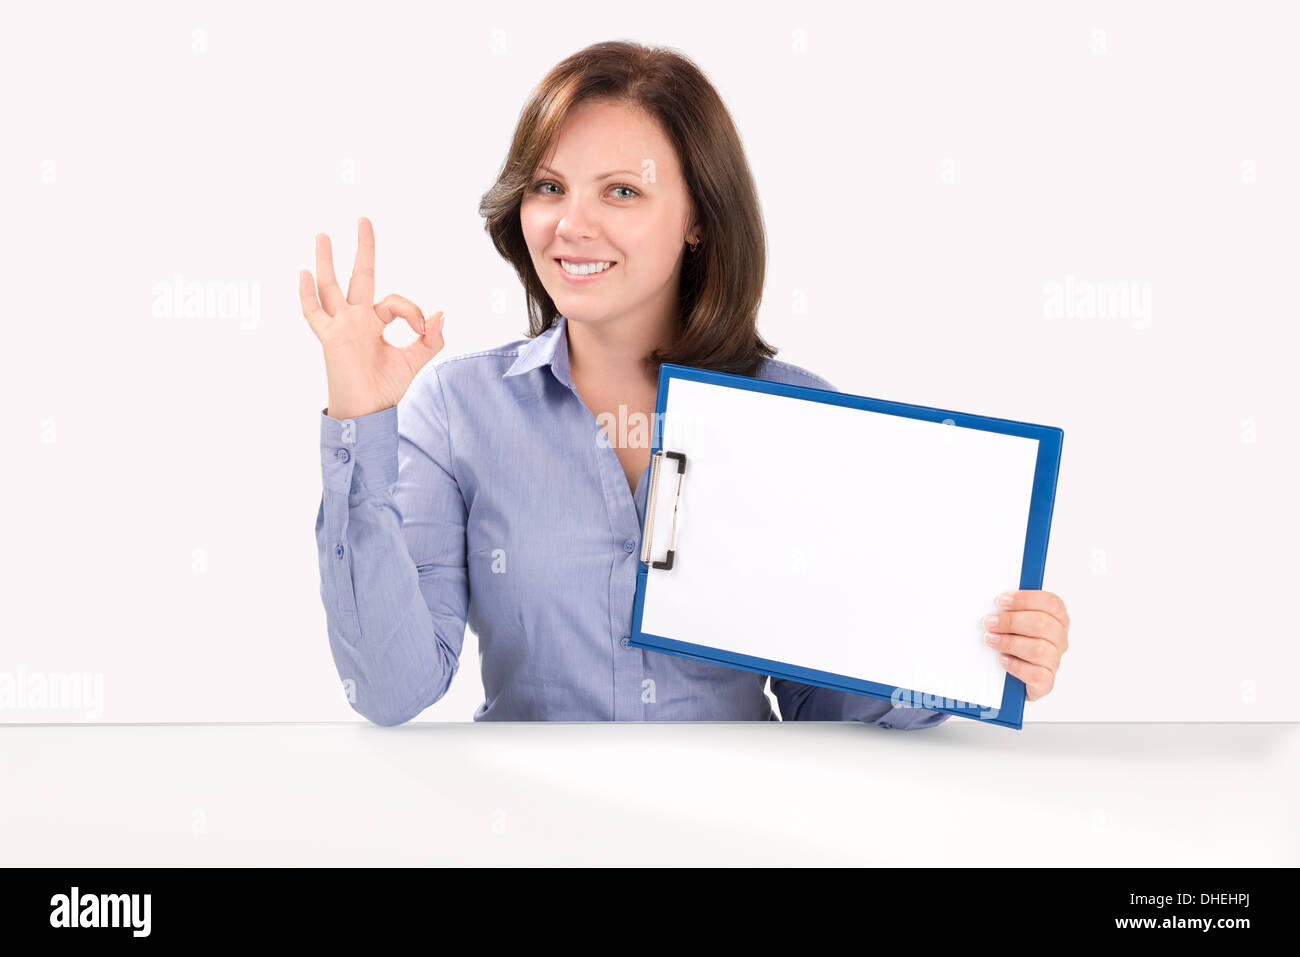 Smiling business woman is holding a blank clipboard and showing ok gesture, business concept Stock Photo